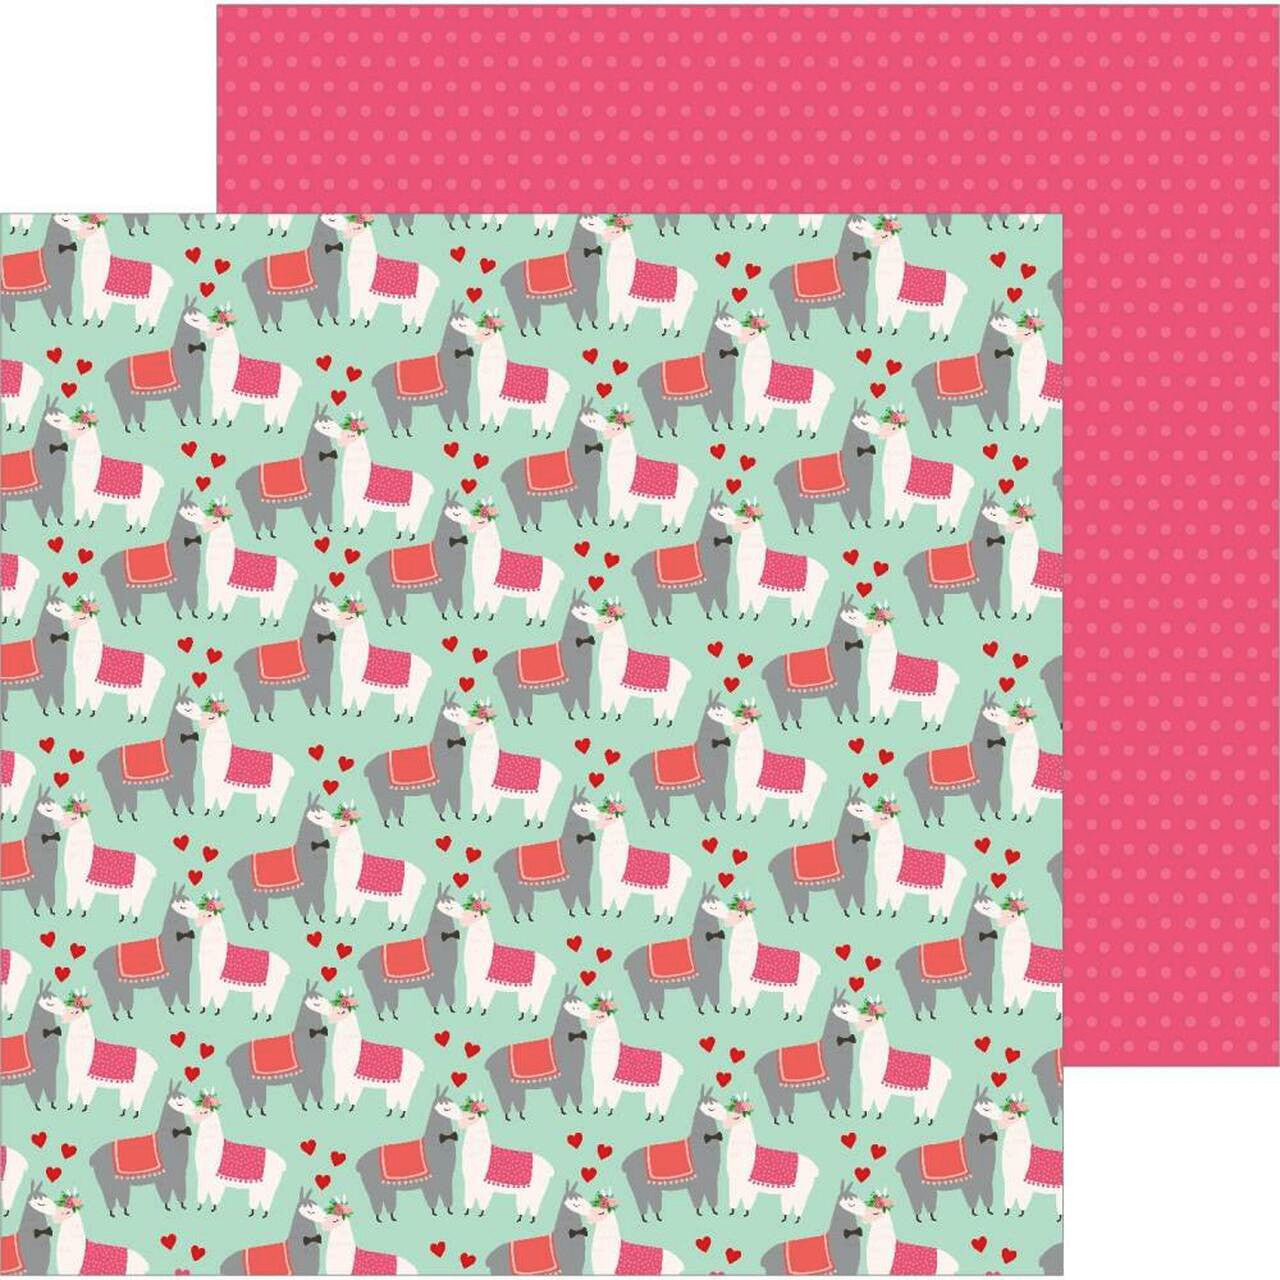 Llama Love - 12x12 double-sided patterned paper by Pebbles